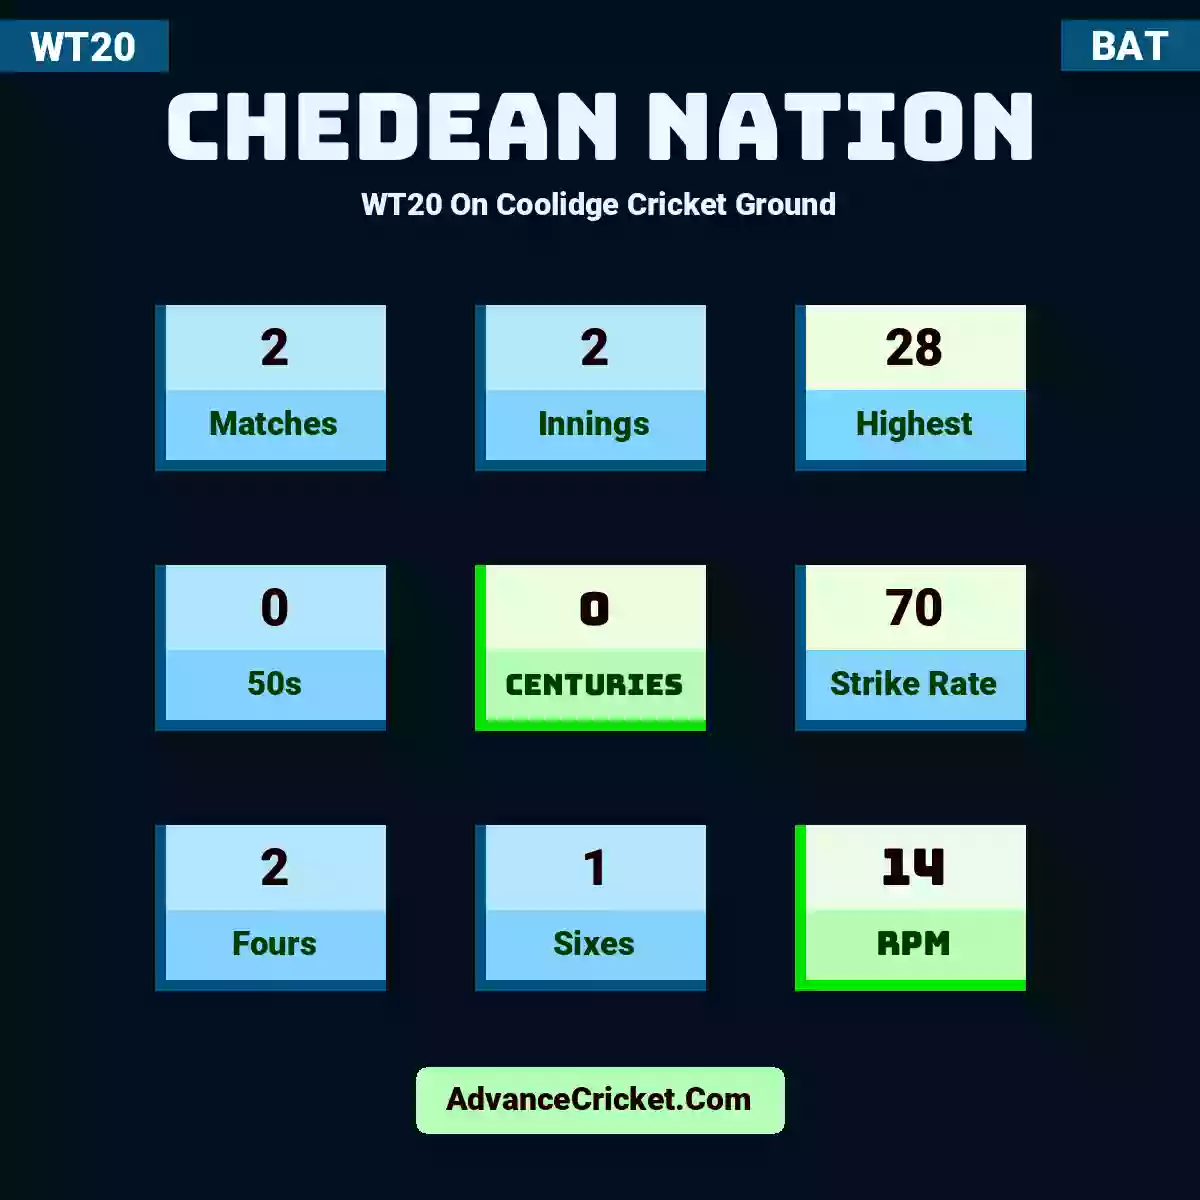 Chedean Nation WT20  On Coolidge Cricket Ground, Chedean Nation played 2 matches, scored 28 runs as highest, 0 half-centuries, and 0 centuries, with a strike rate of 70. C.Nation hit 2 fours and 1 sixes, with an RPM of 14.